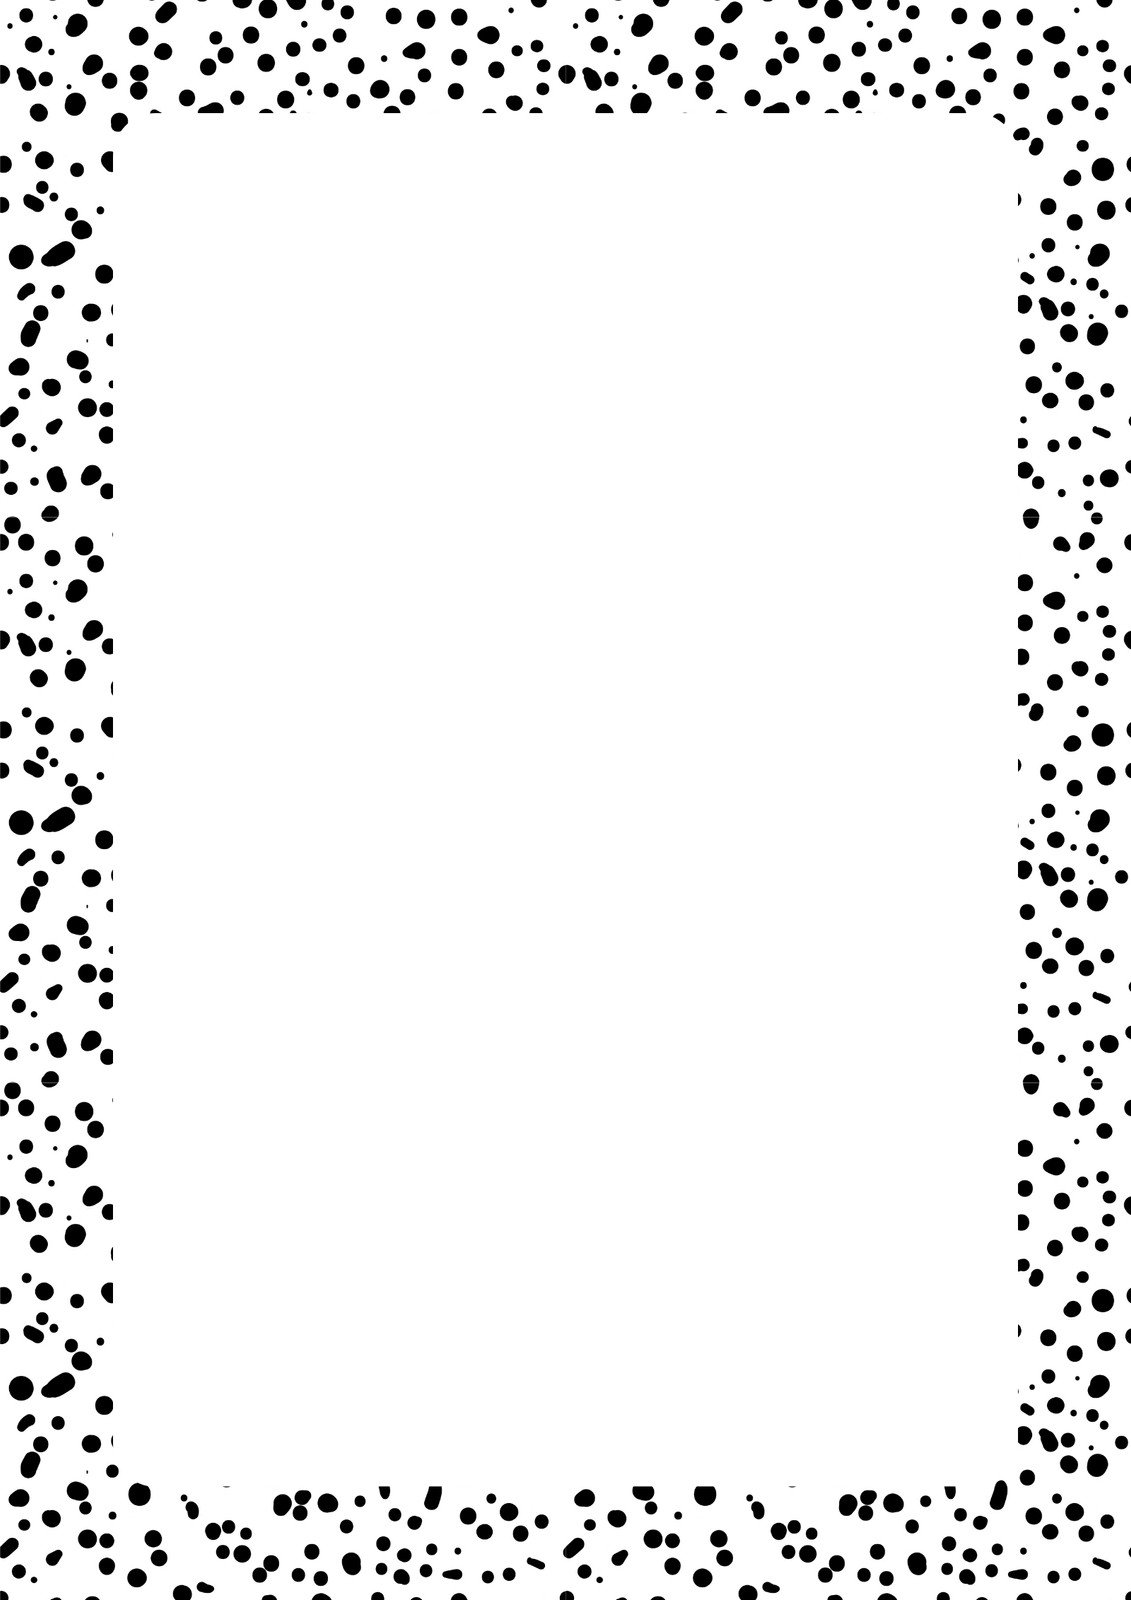 Black And White Polka Dots Borders And Frames